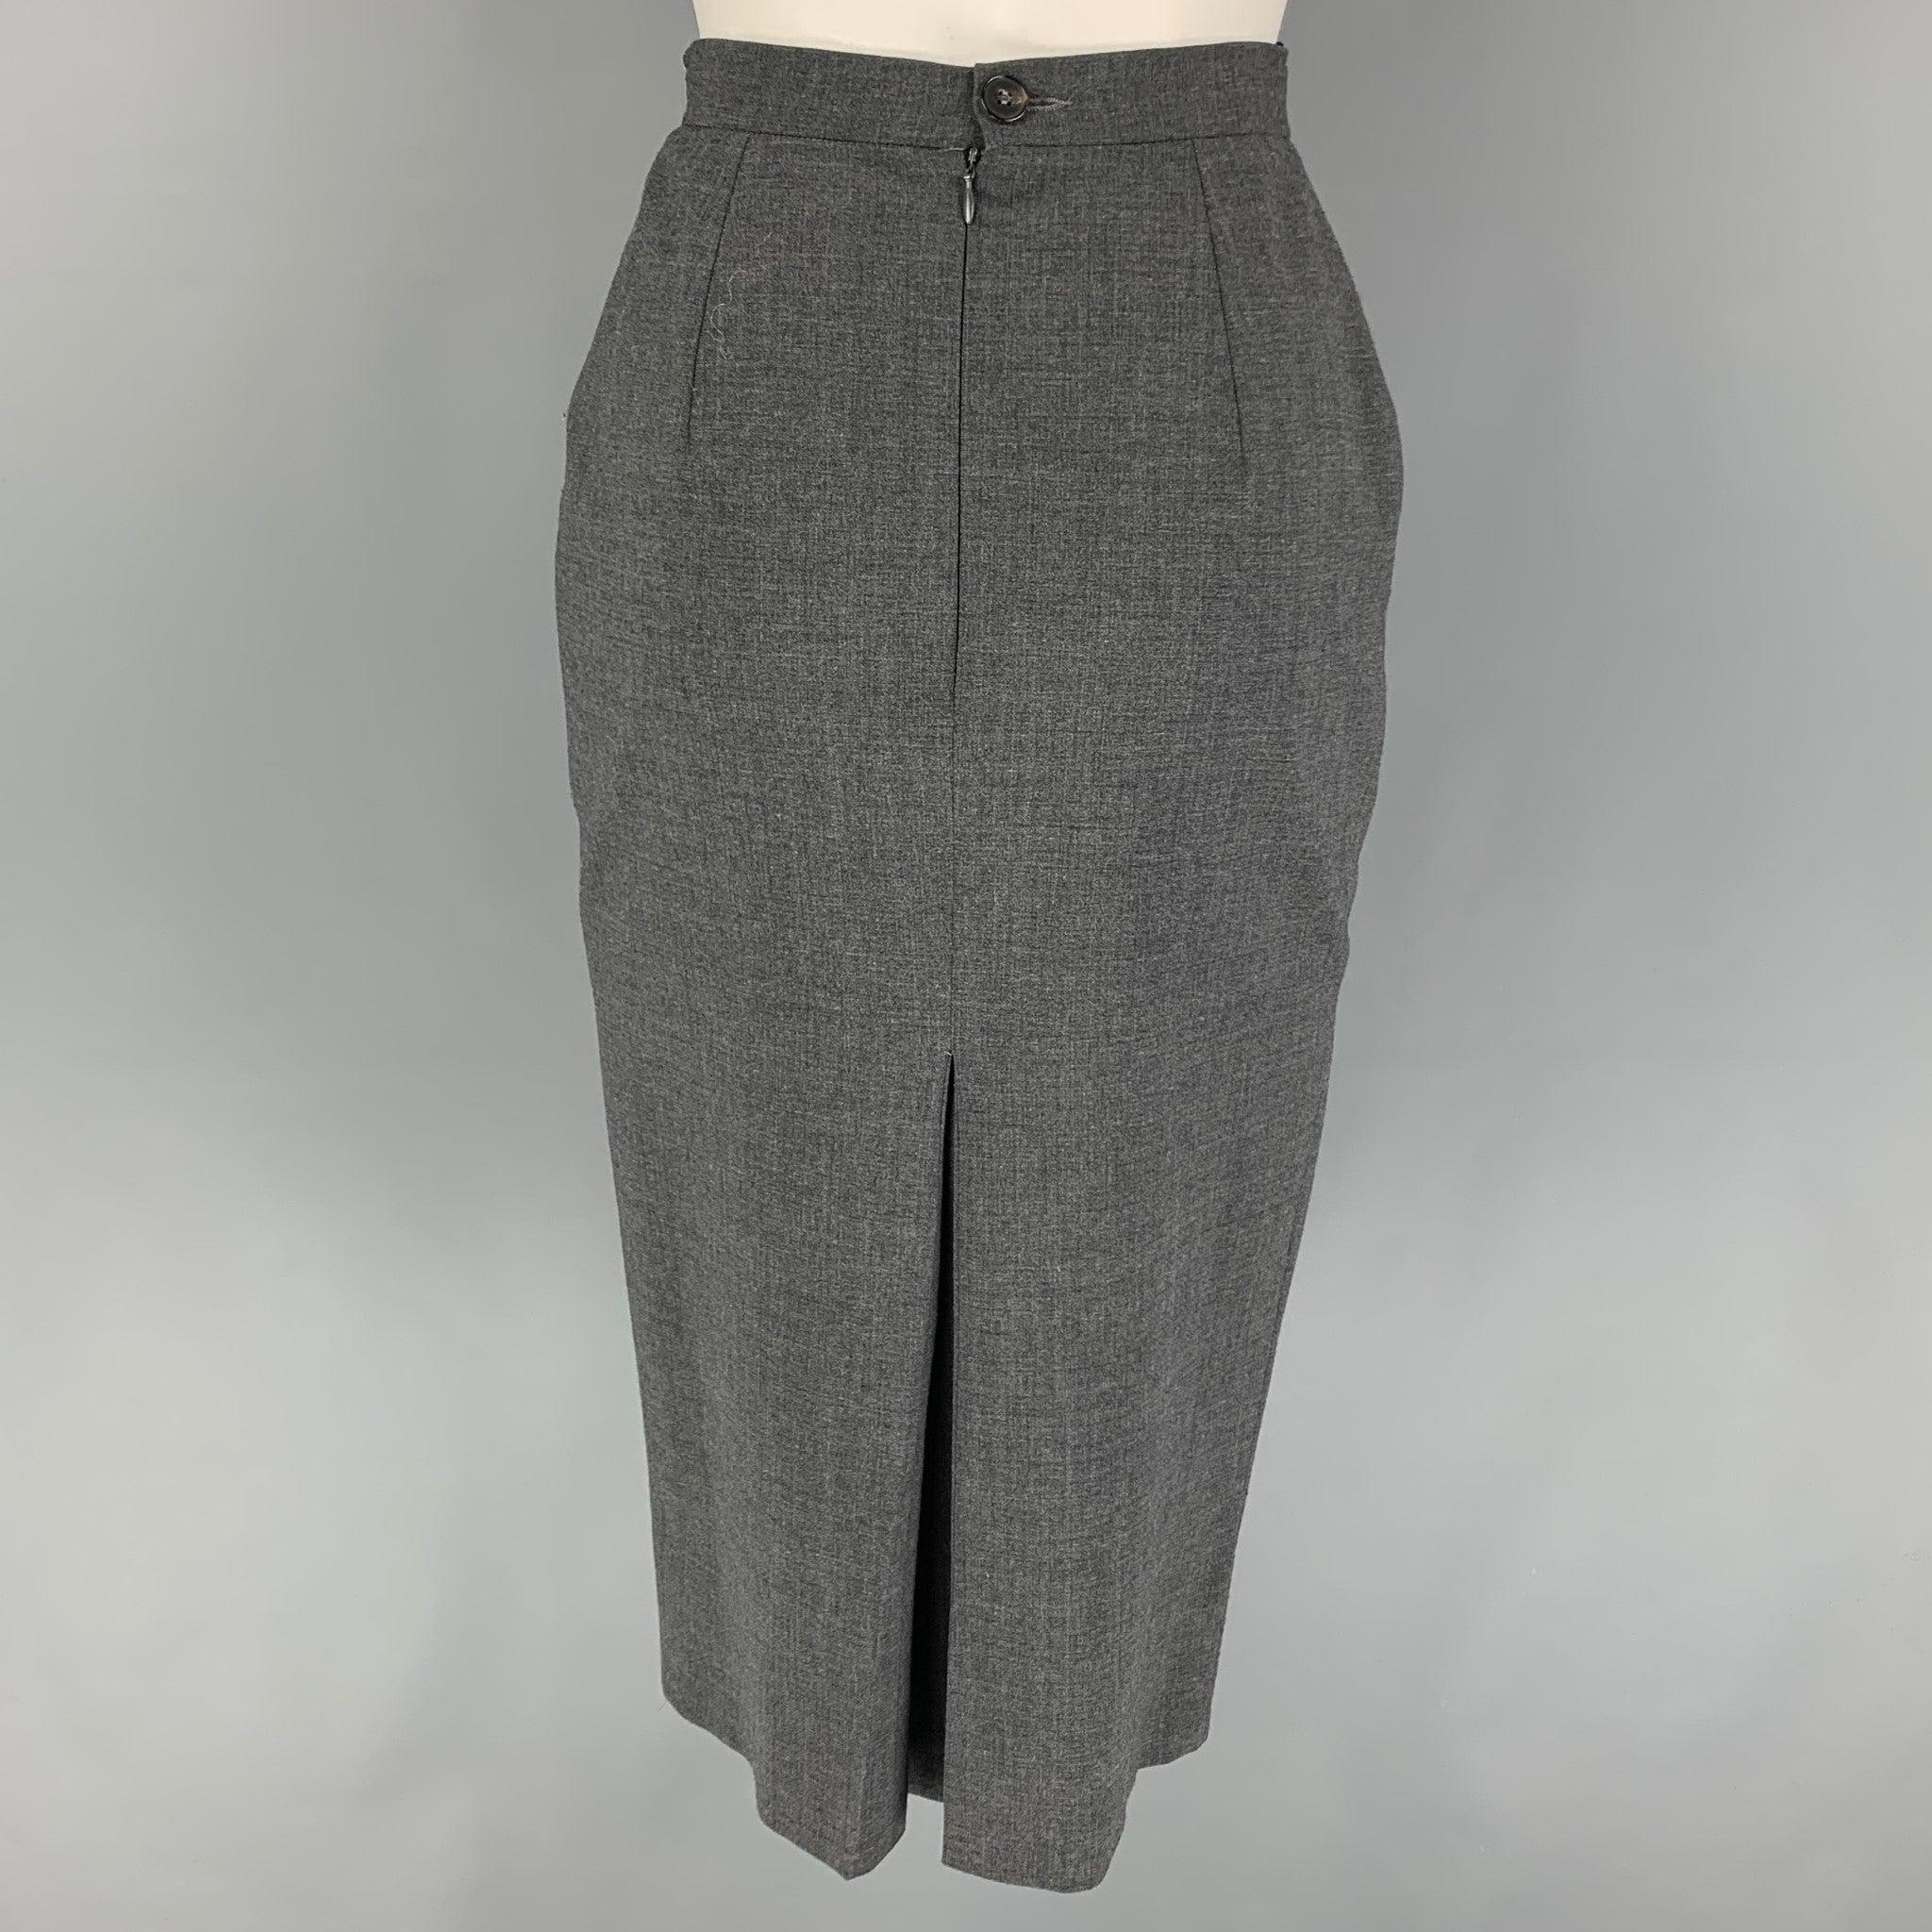 MOSCHINO COUTURE Size 6 Grey Wool Polyamide Heather Mid-Calf Skirt In Good Condition For Sale In San Francisco, CA